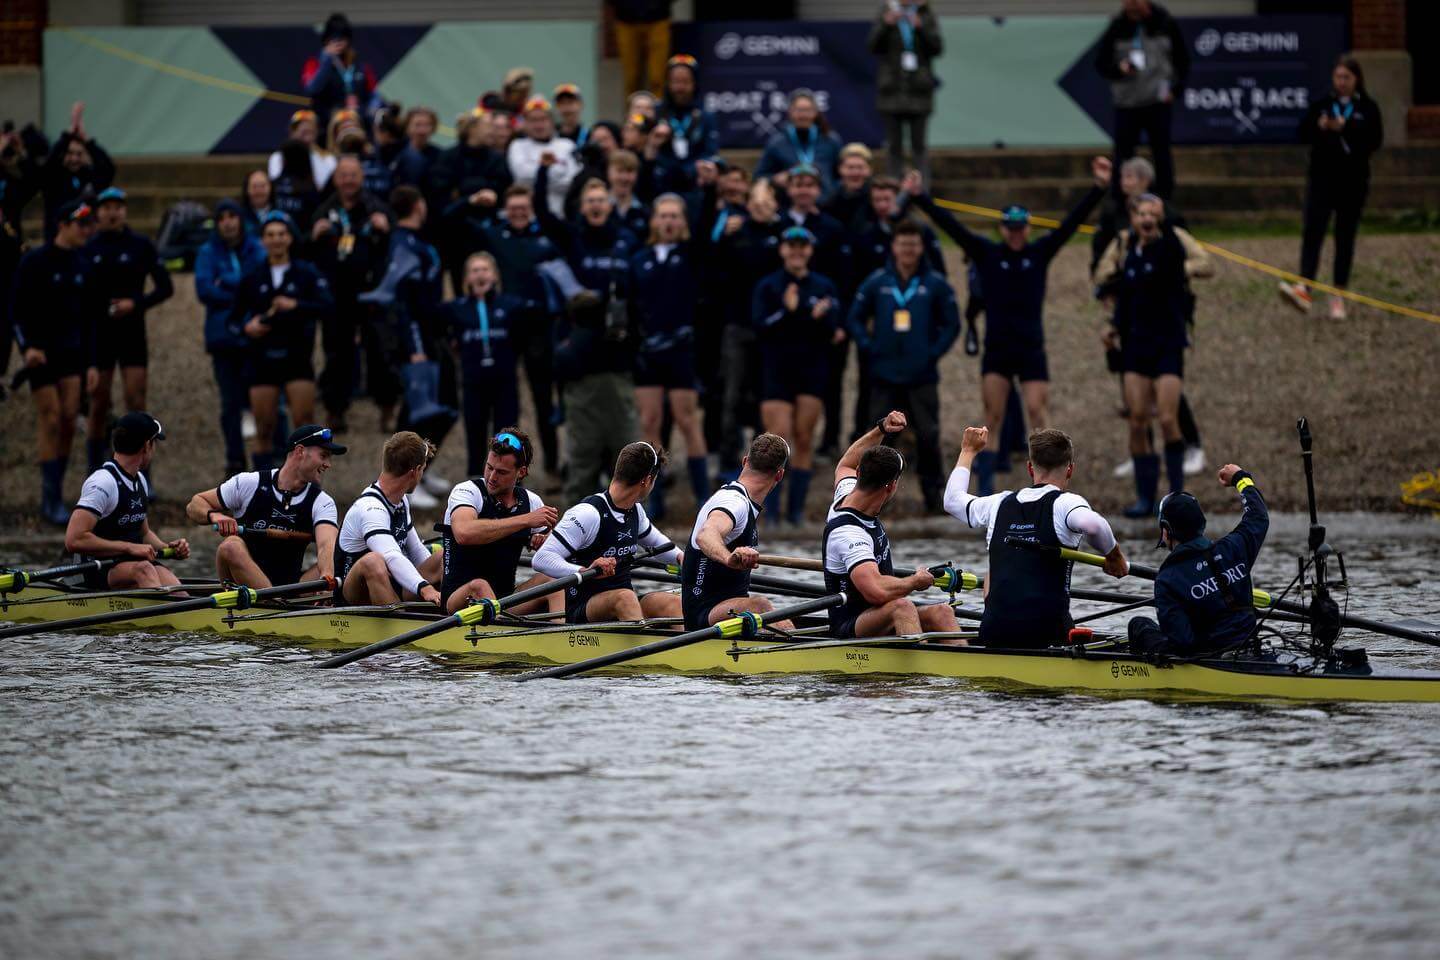 Head of the River Boat Race, London